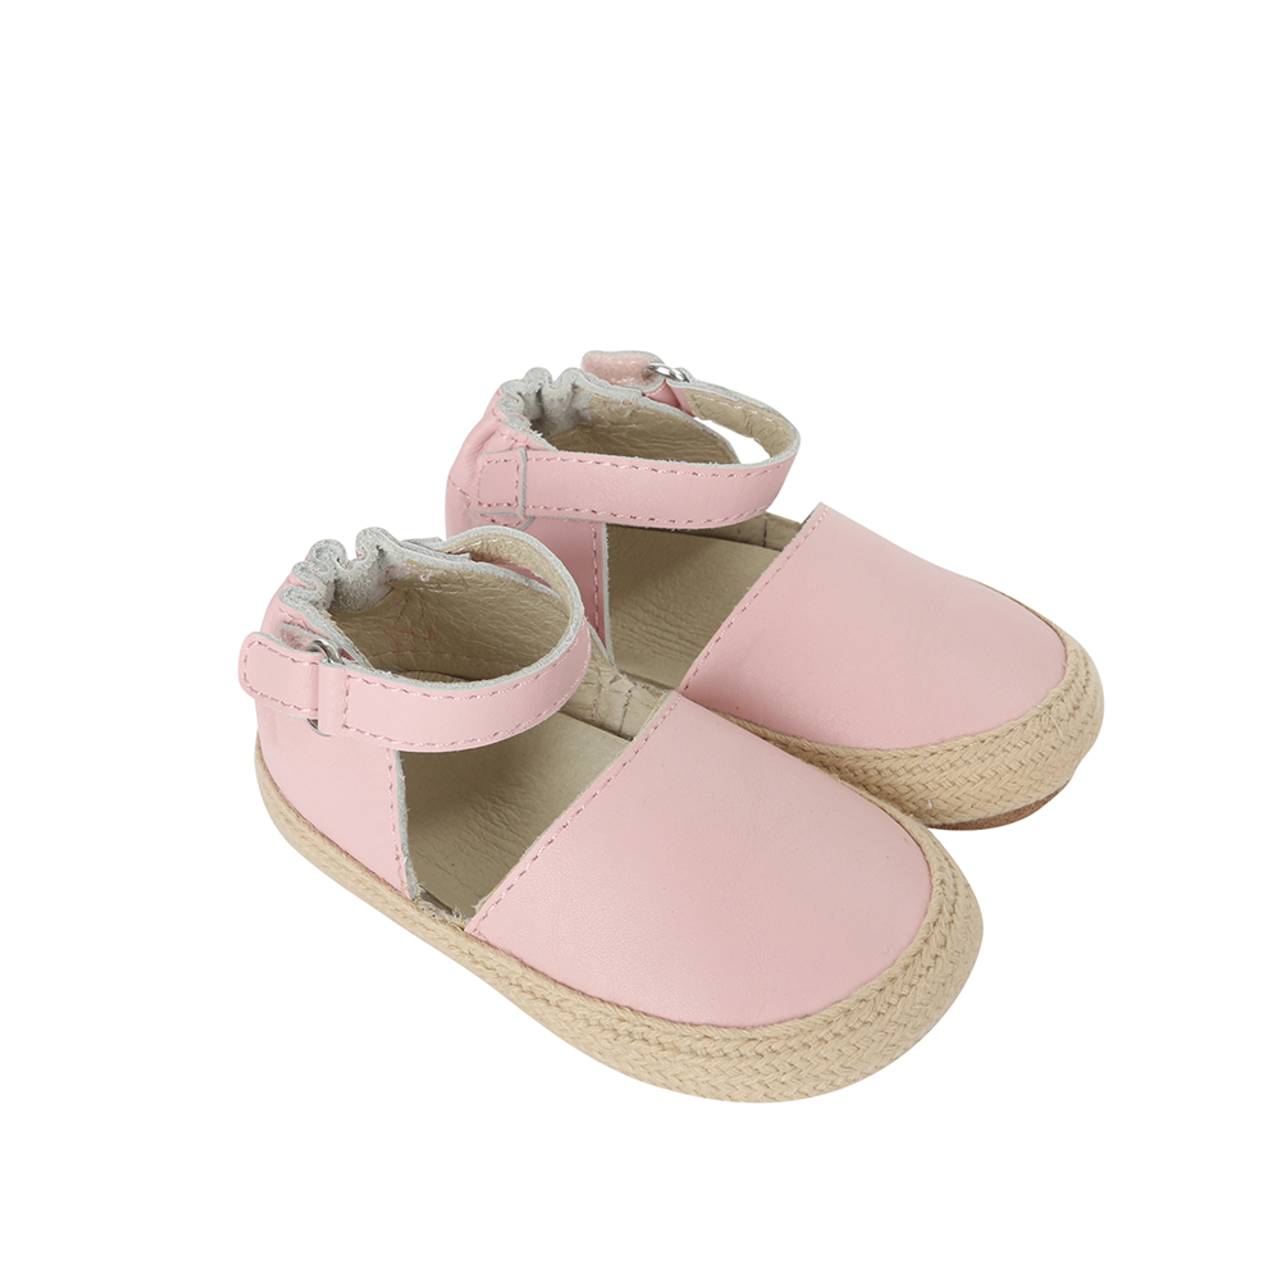 Kelly Espadrille Baby Shoes | Robeez